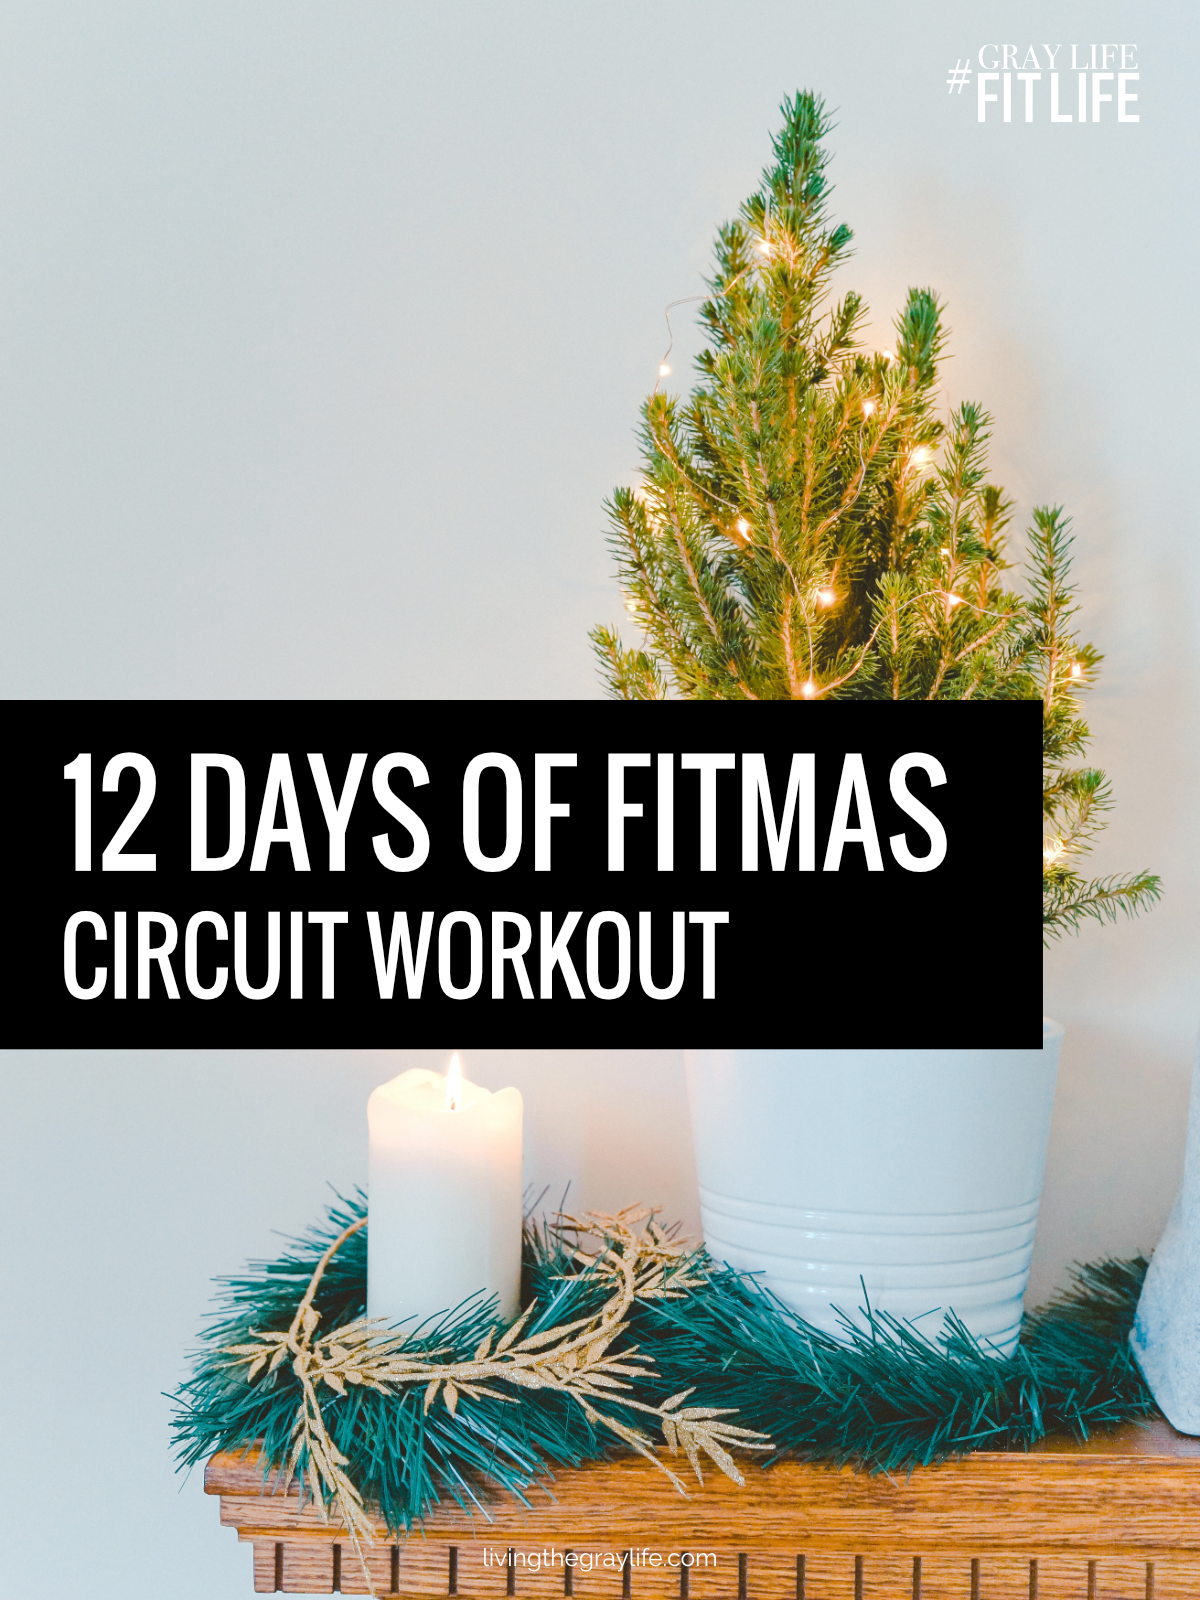 12 Days of Fitmas Circuit Workout